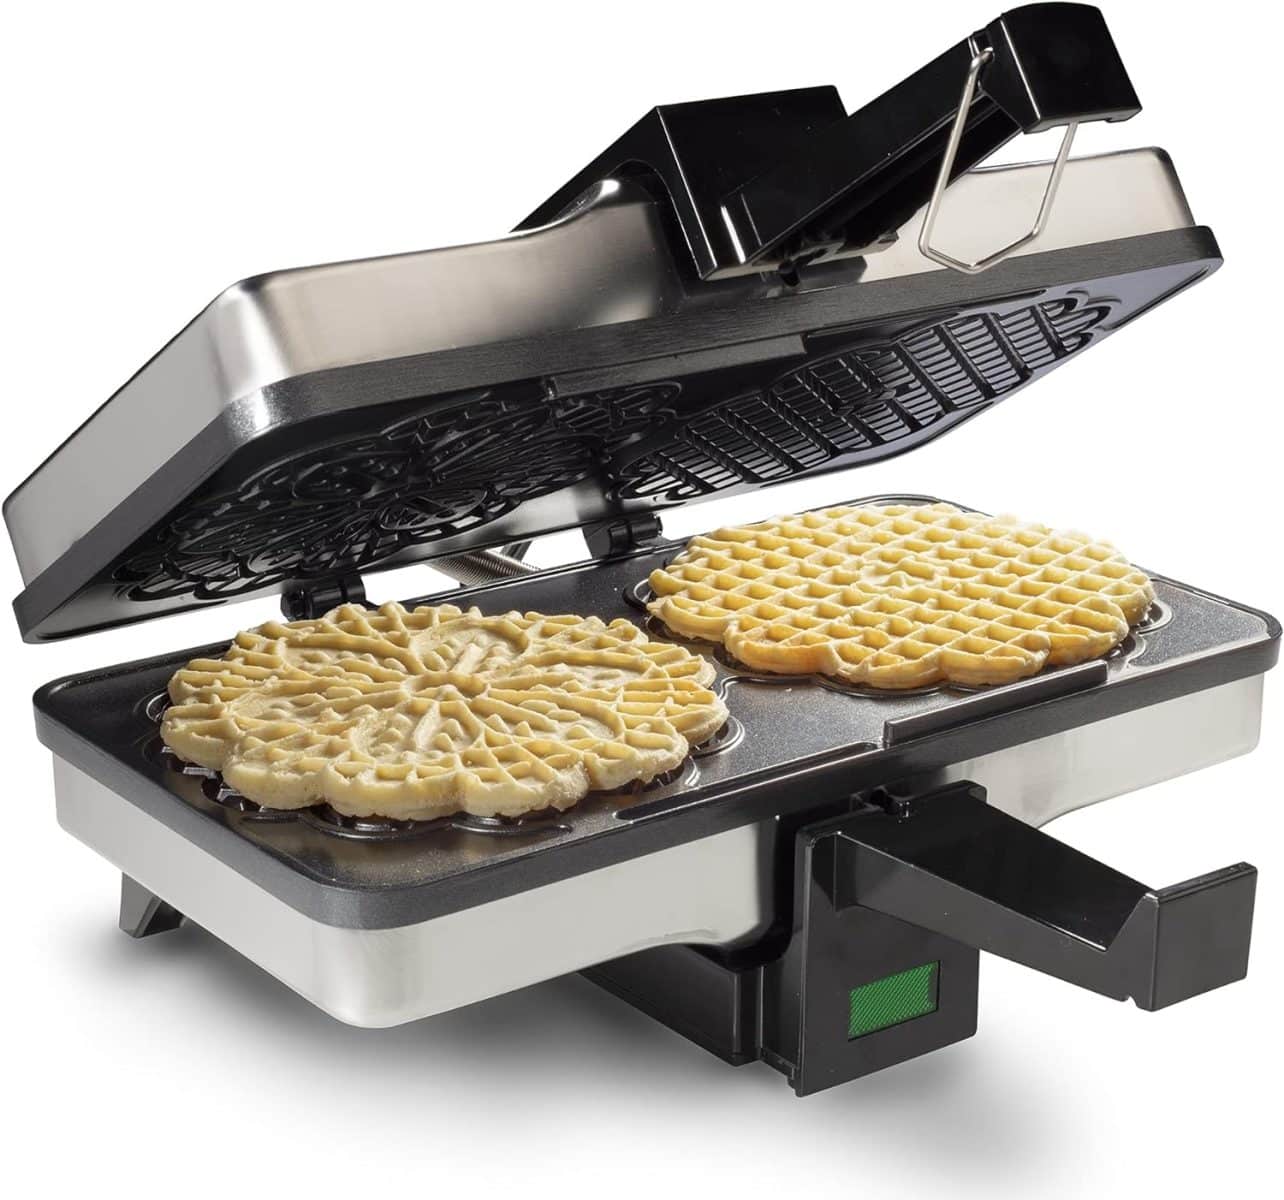 Cucinapro Pizzelle Iron.